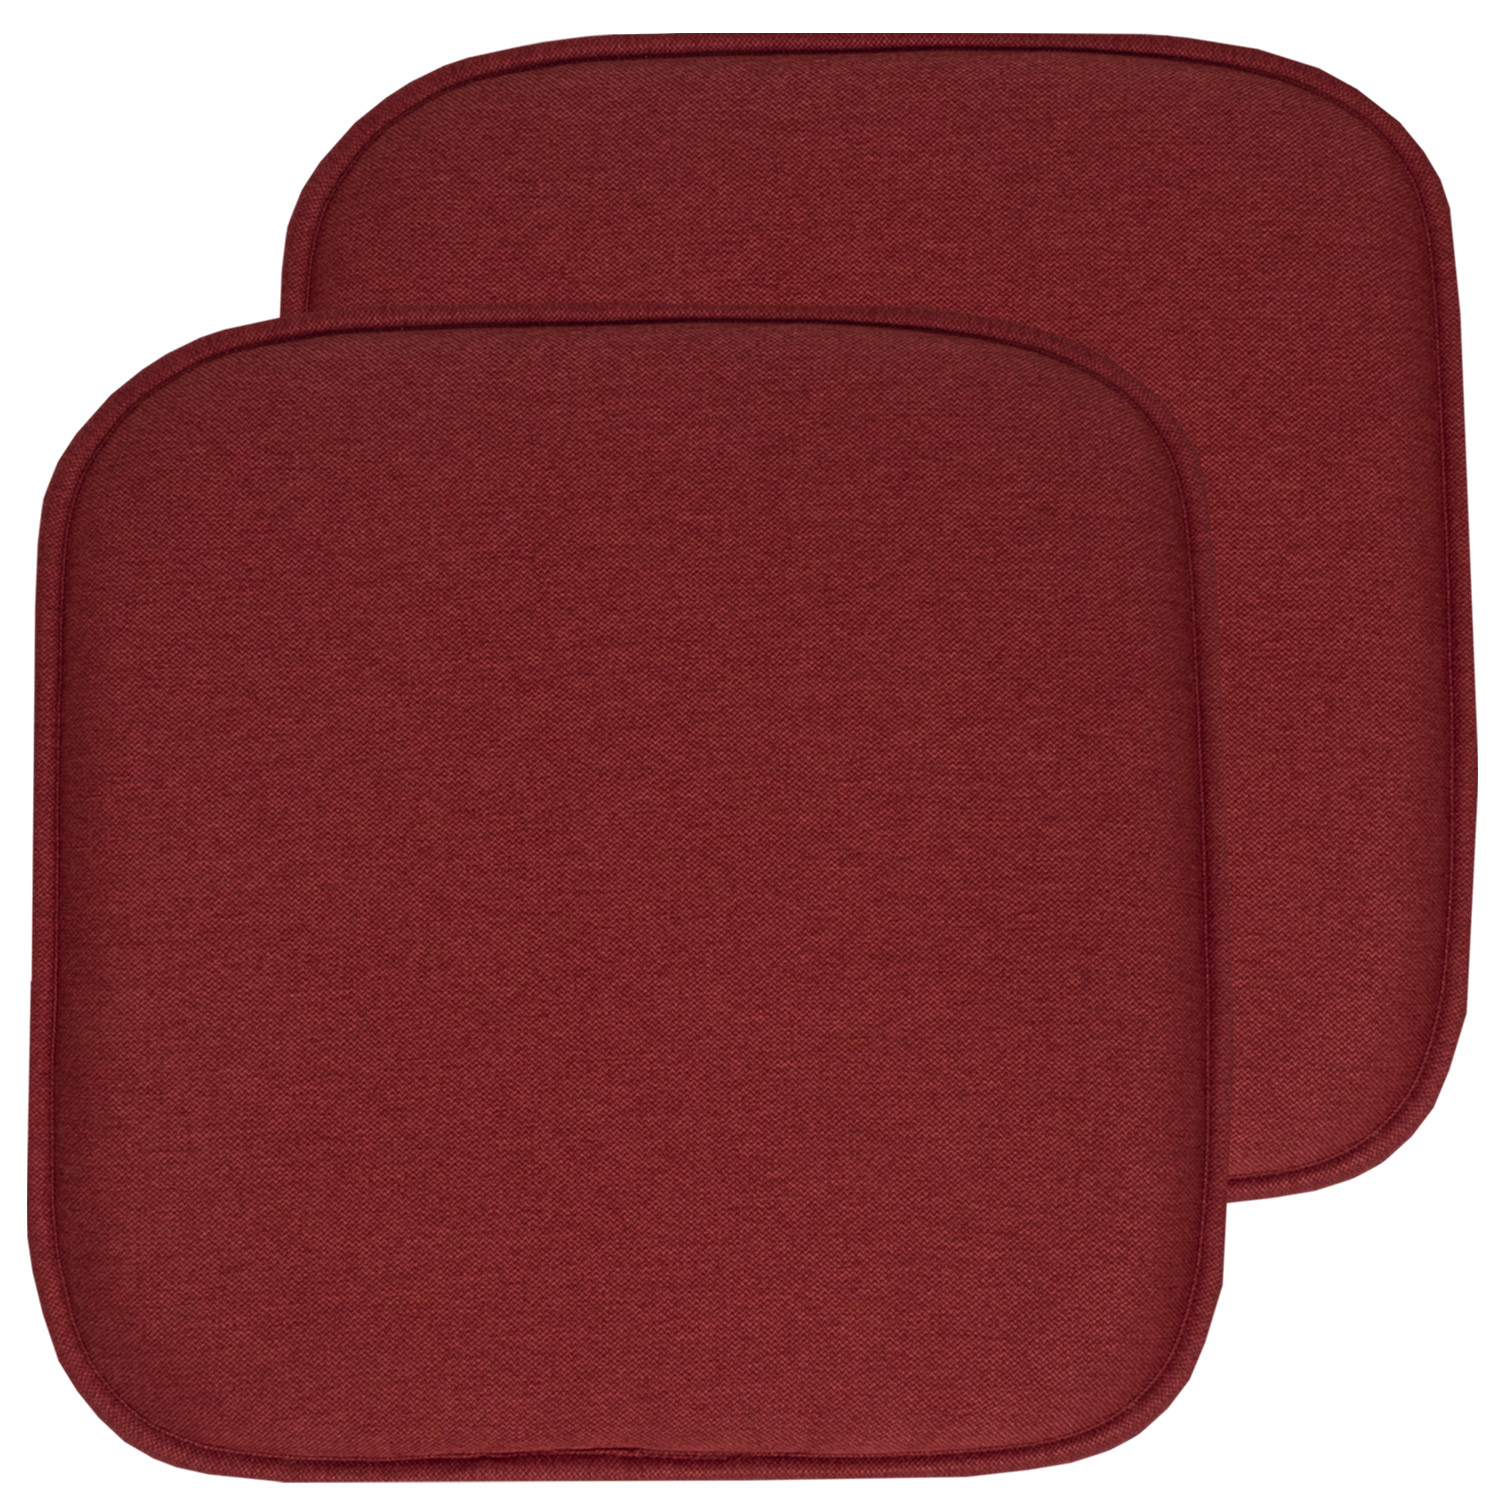 Charlotte Jacquard Cover Memory Foam Chair Pads 2, 4, 6 or 12 Pack | eBay